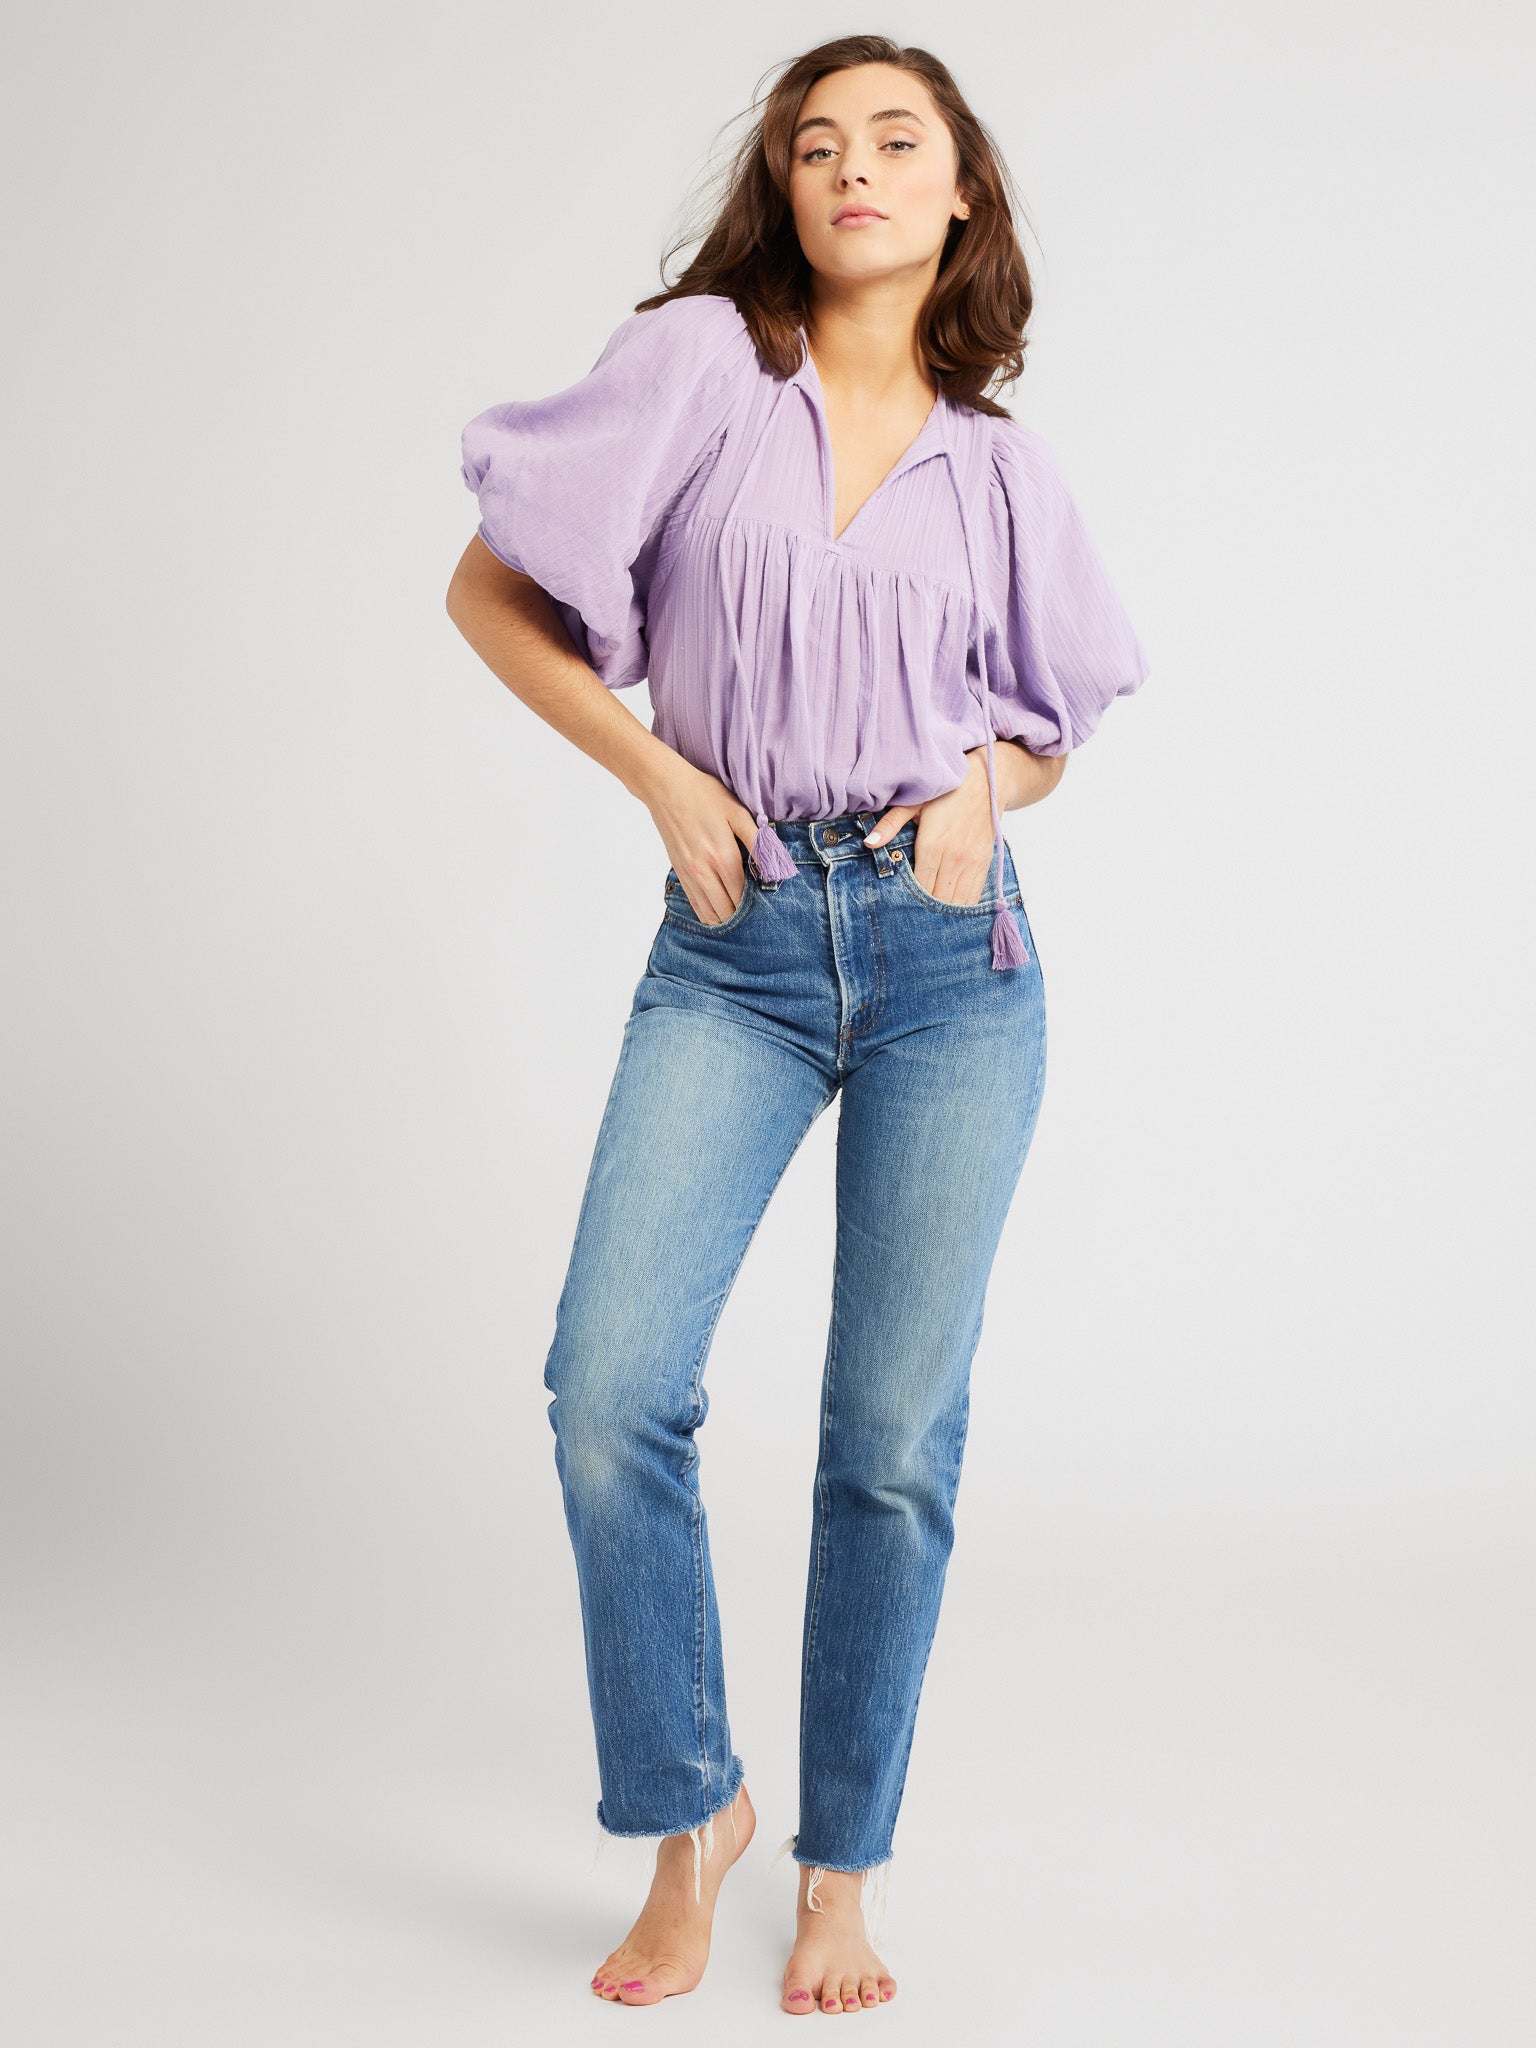 MILLE Clothing Thalia Top in Taffy Double Gauze